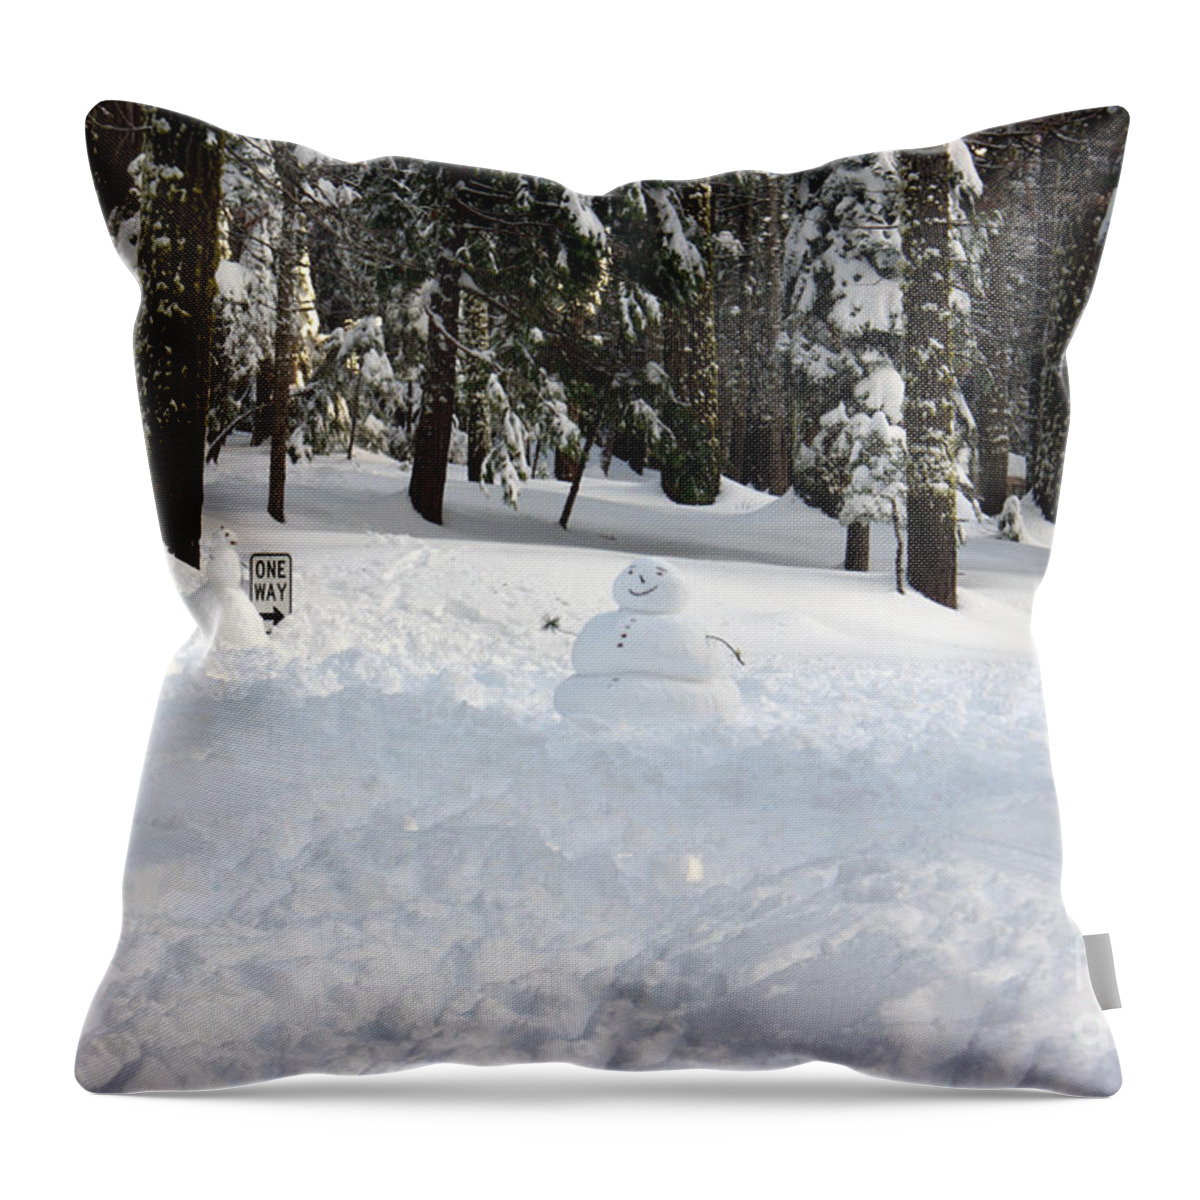 Snowman Throw Pillow featuring the photograph Wrong way snowman by Christine Jepsen